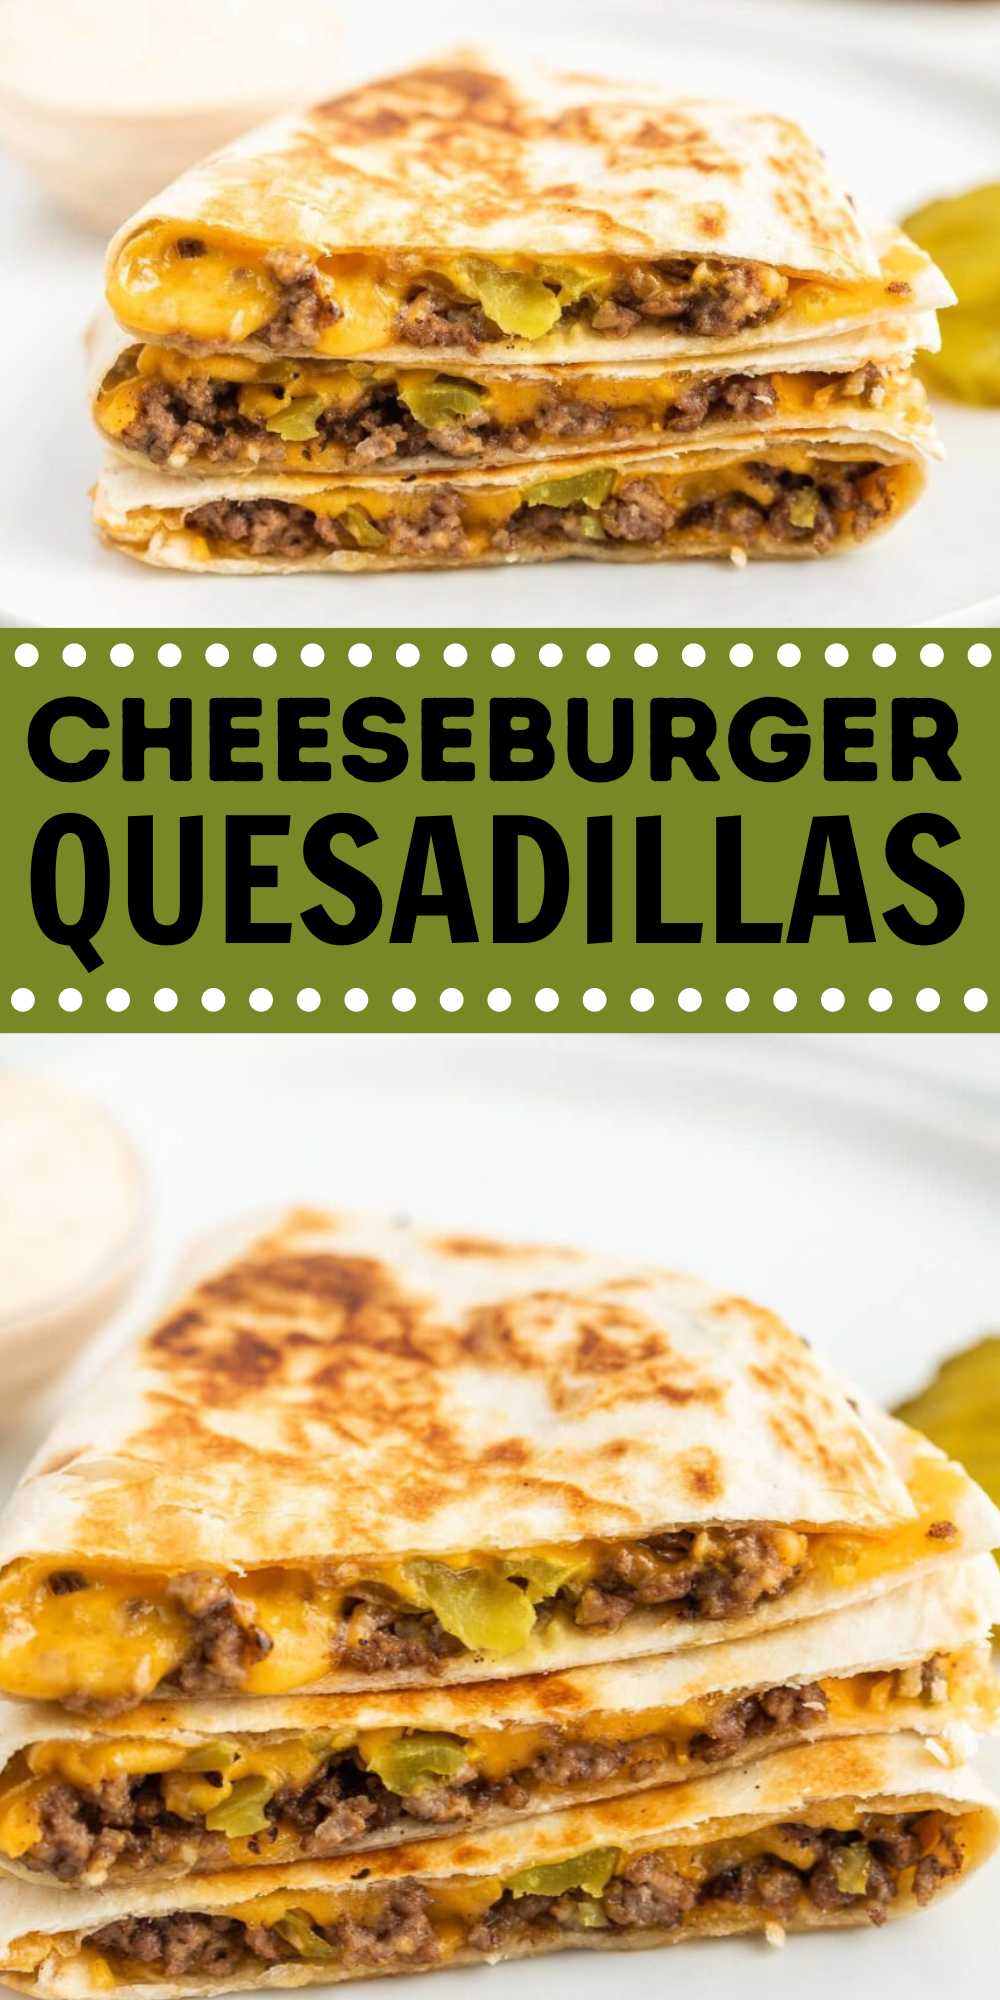 If you love making quesadillas as much as my family, than this Cheeseburger Quesadillas is for you. Fill a flour tortilla with yummy topping. These quesadilla is simple to make with easy ingredients. Making this quesadilla for a quick lunch saves me time and money. Add your favorite sides to complete a delicious meal idea. #cheeseburgerquesadillas #eatingonadime #quesadillas